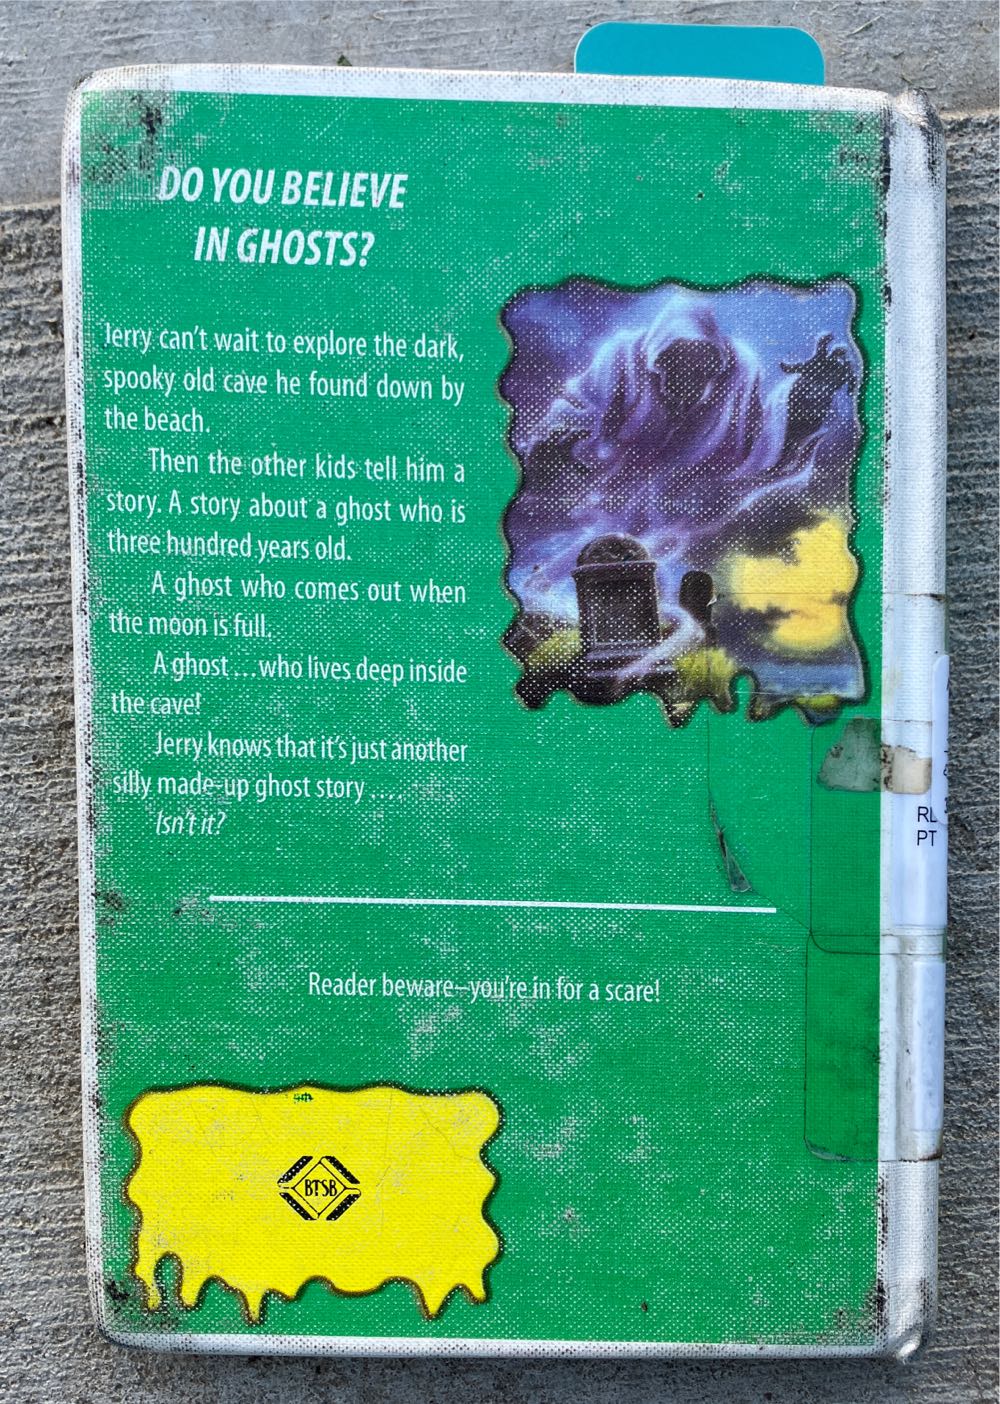 Goosebumps 22: Ghost Beach - R.L. Stine (Scholastic  Inc. - Paperback) book collectible [Barcode 9780439568302] - Main Image 3